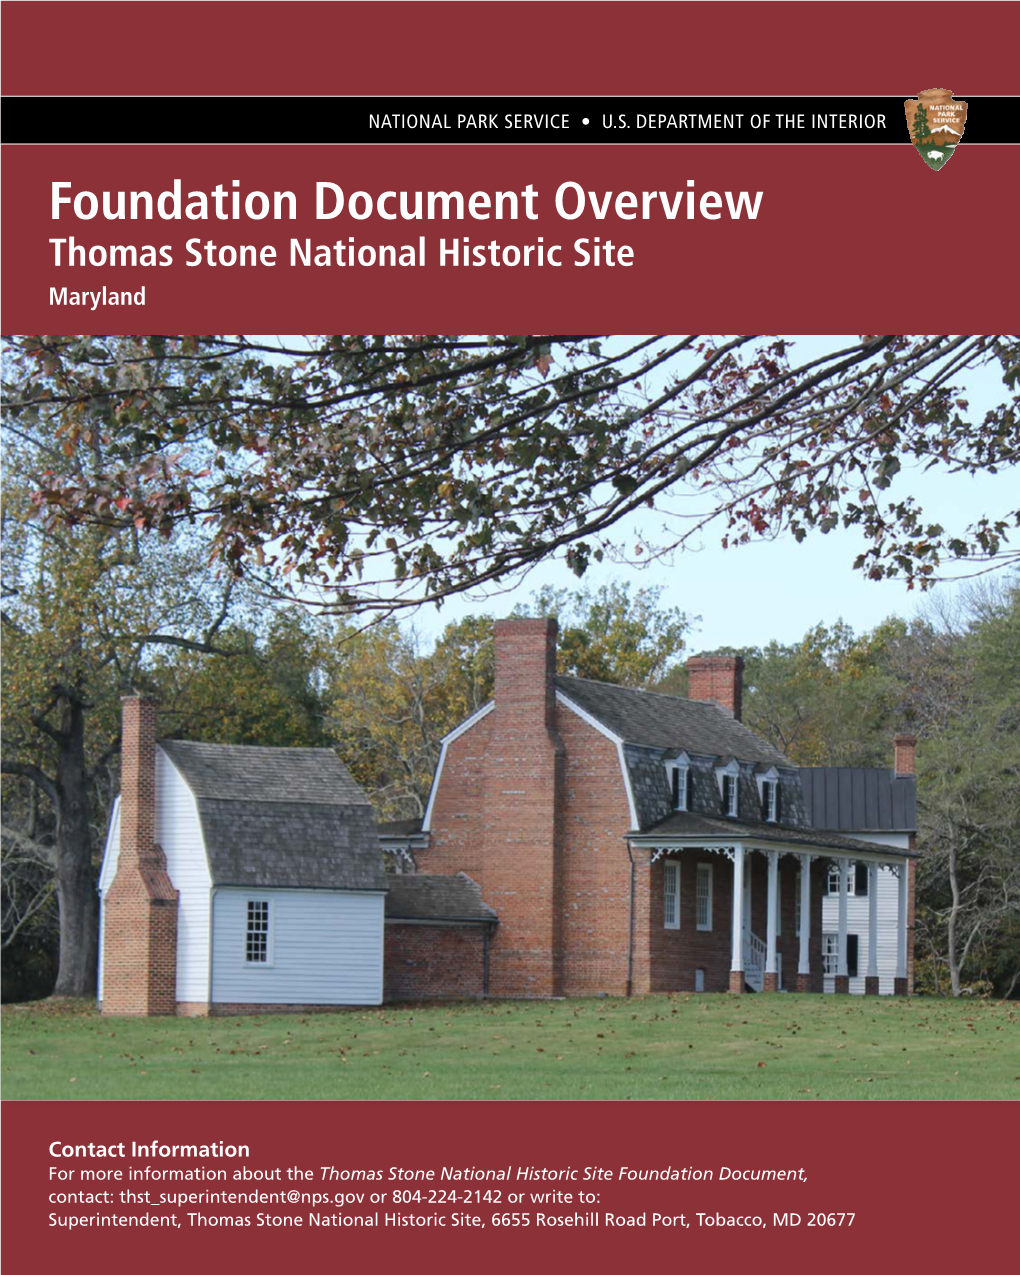 Thomas Stone National Historic Site Foundation Document Overview